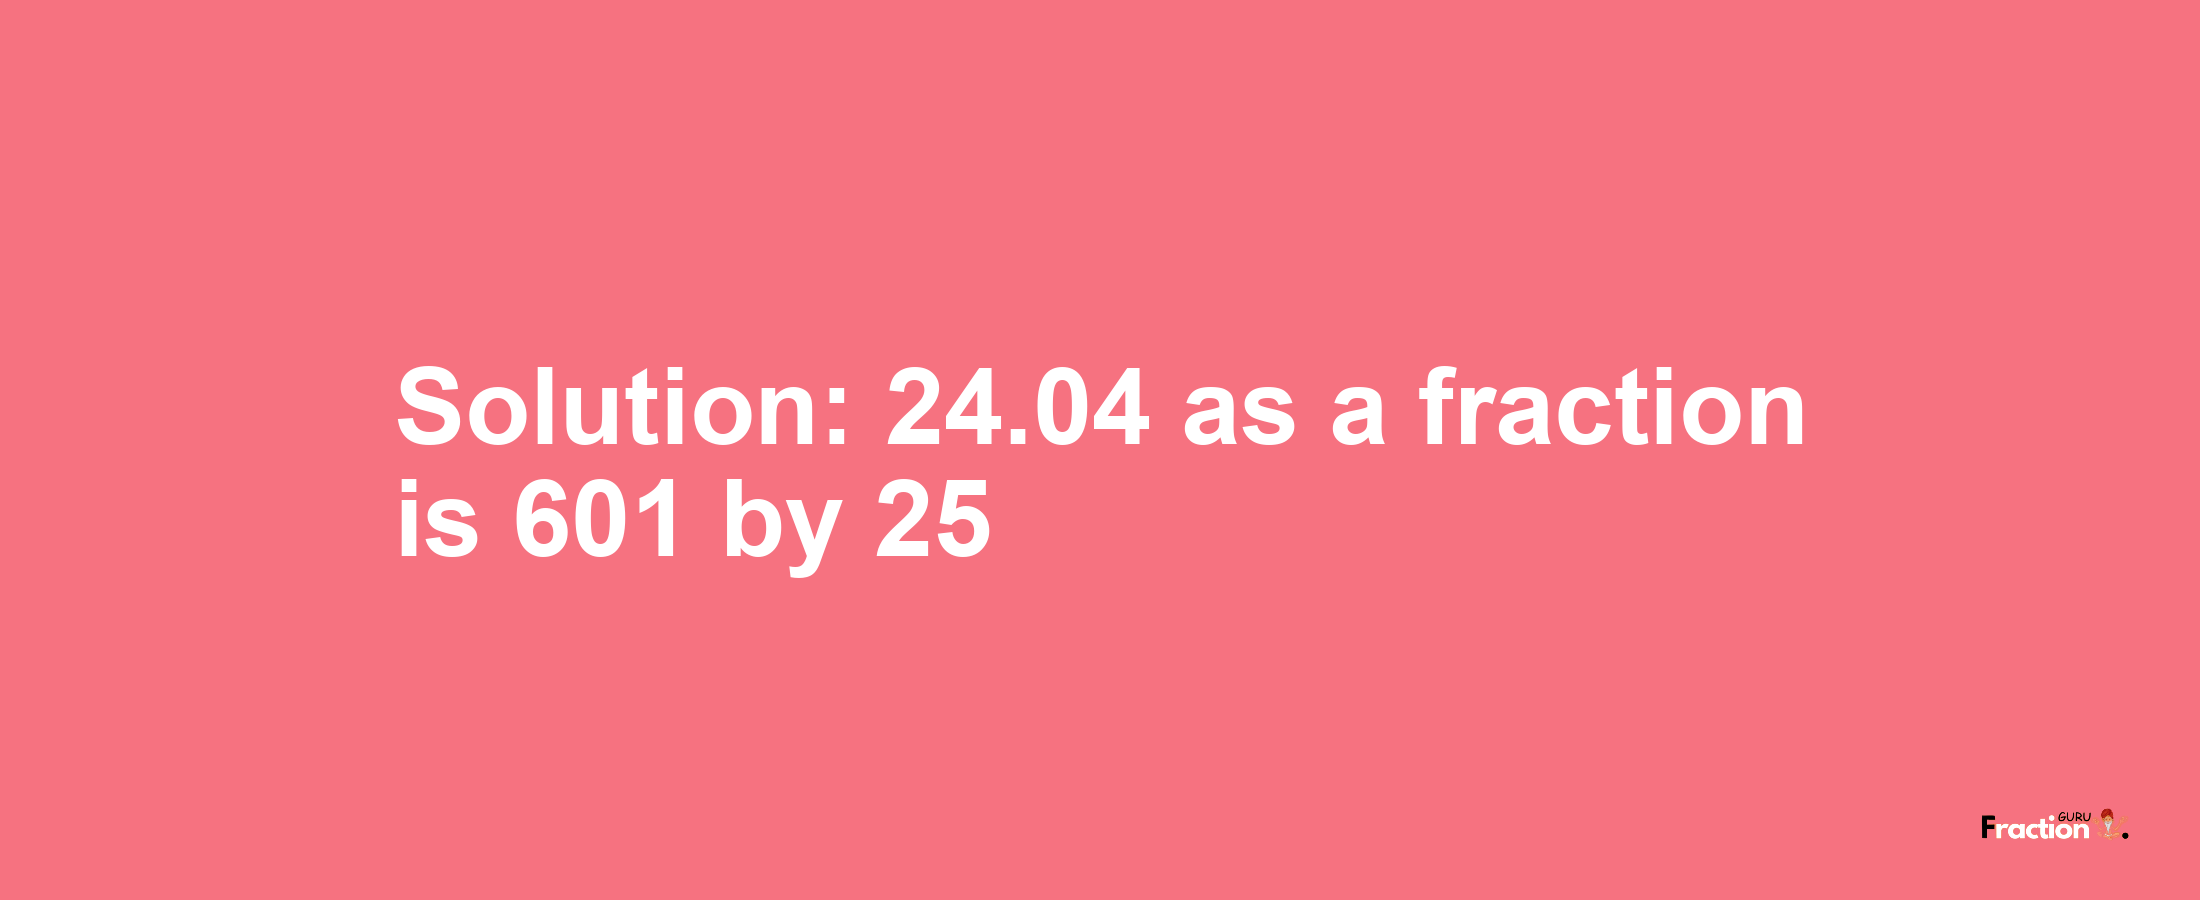 Solution:24.04 as a fraction is 601/25